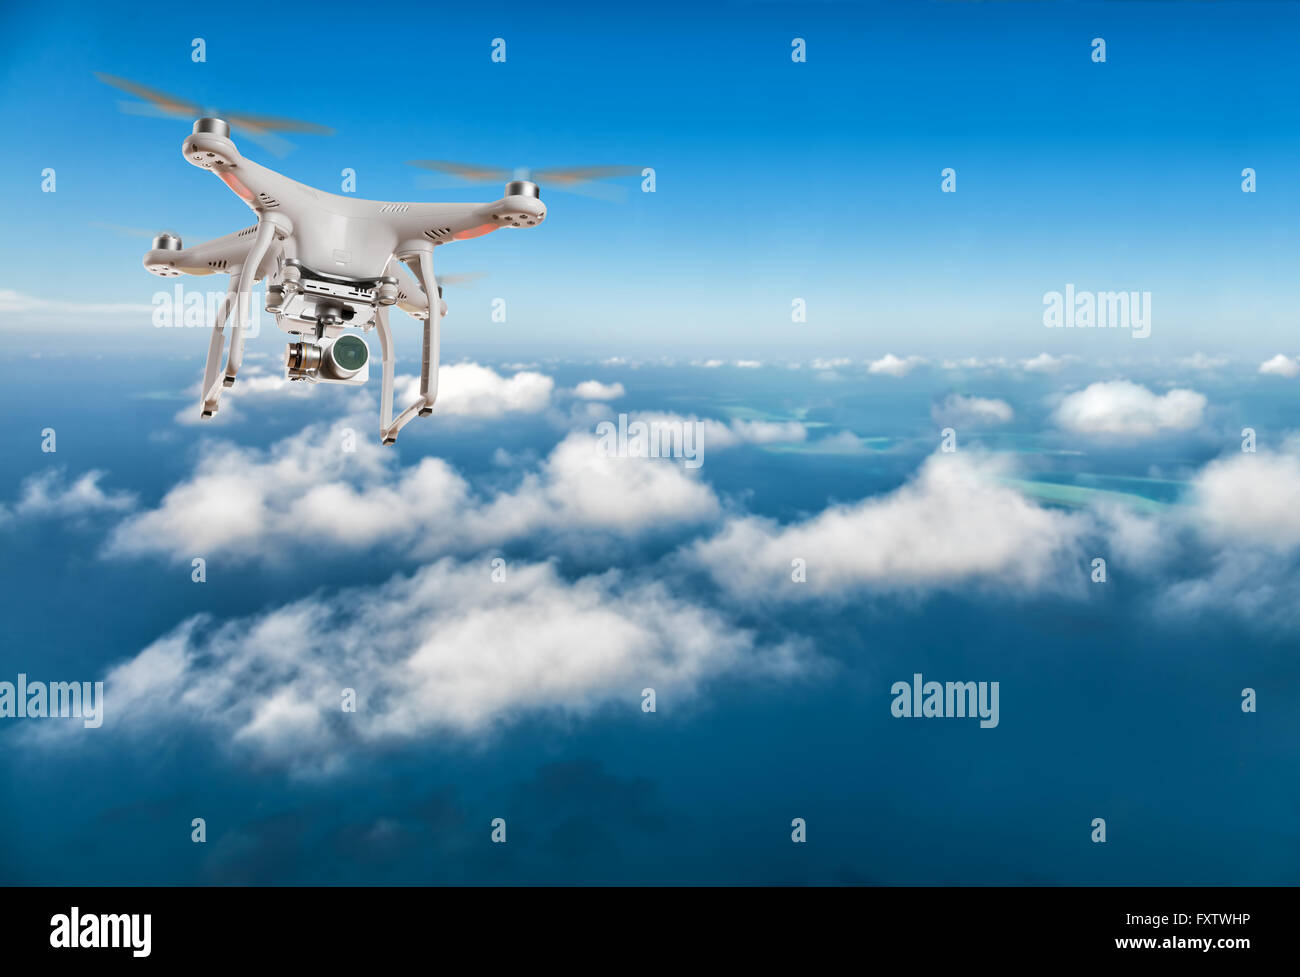 Drone for industrial works flying above clouds. Concept of pottential danger of aircraft collision Stock Photo